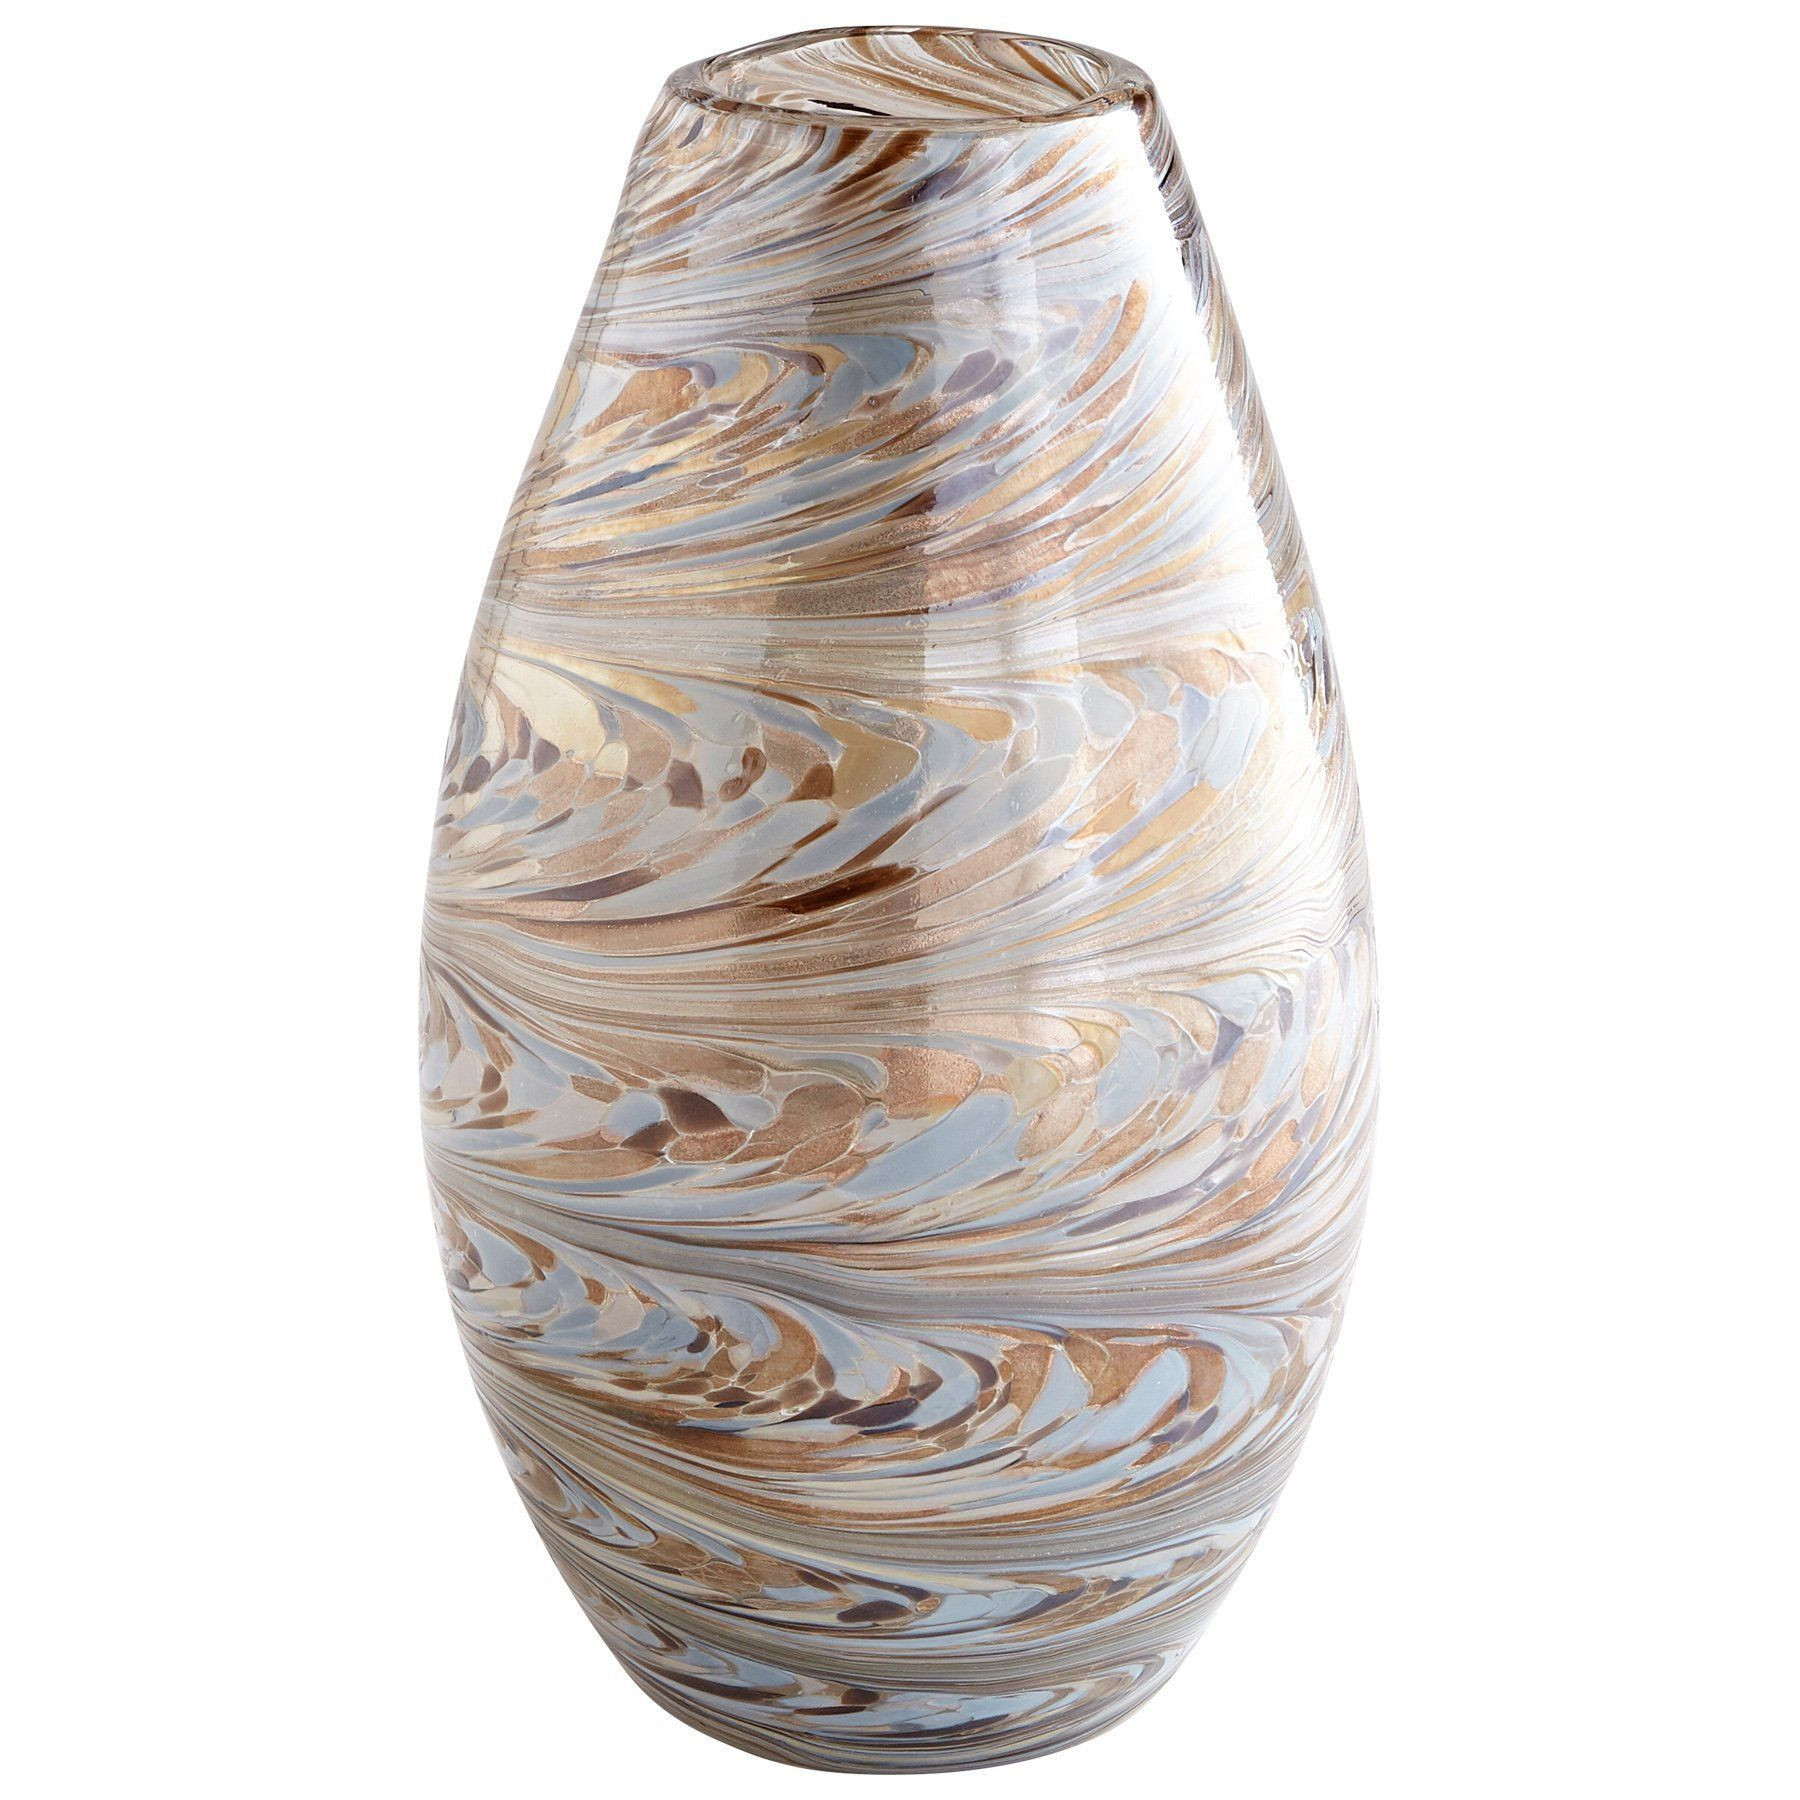 22 Fantastic Cartier Crystal Vase 2024 free download cartier crystal vase of 44 gold and silver vase the weekly world for caravelas small gold silver metallic sand swirl art glass vase by